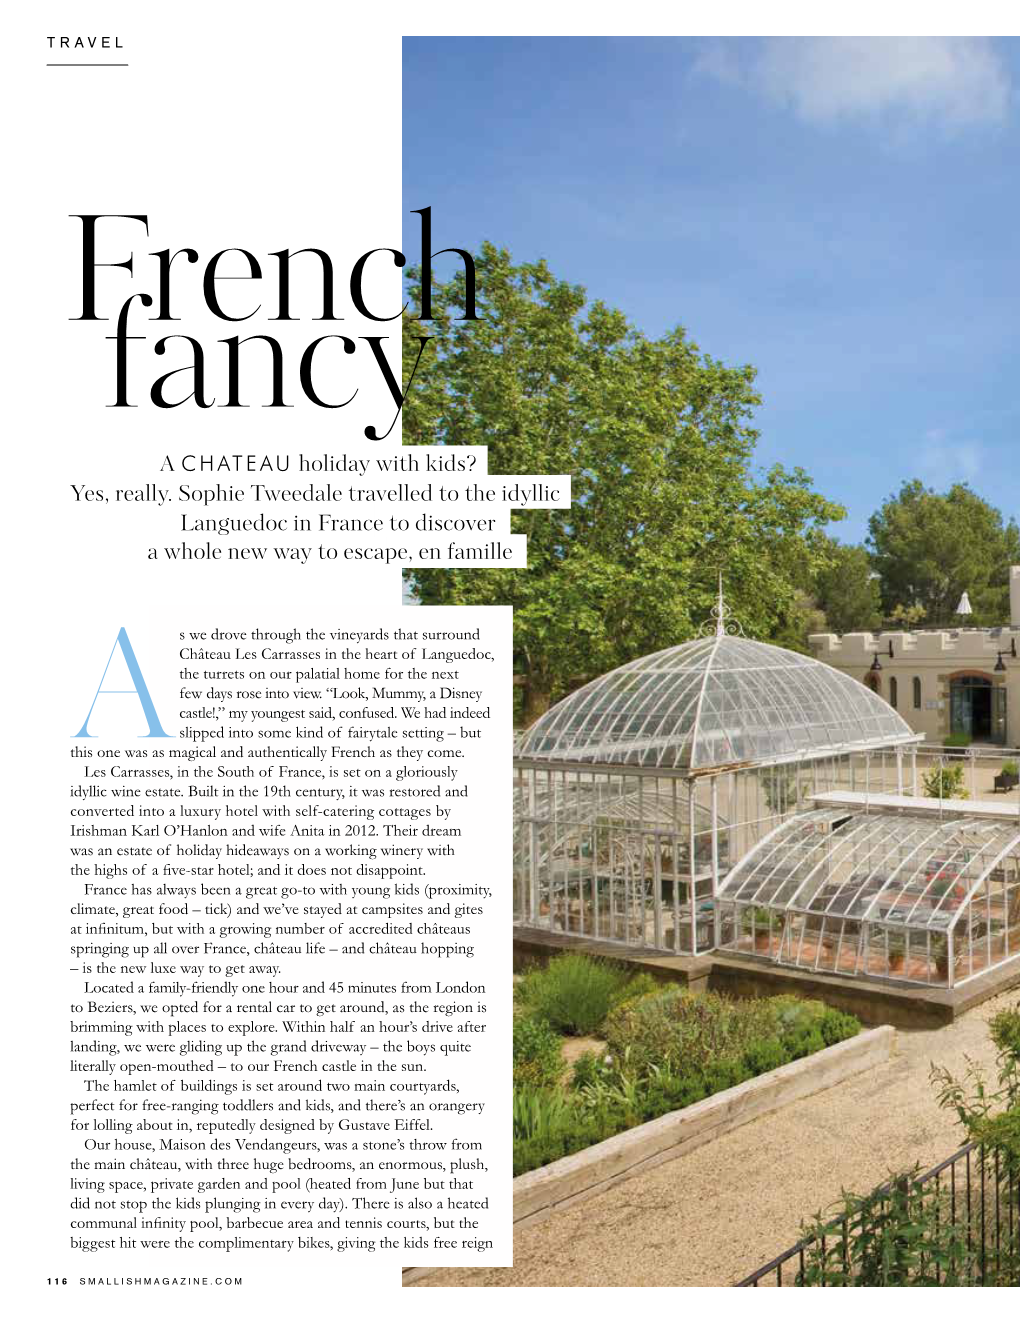 A CHATEAU Holiday with Kids? Yes, Really. Sophie Tweedale Travelled to the Idyllic Languedoc in France to Discover a Whole New Way to Escape, En Famille